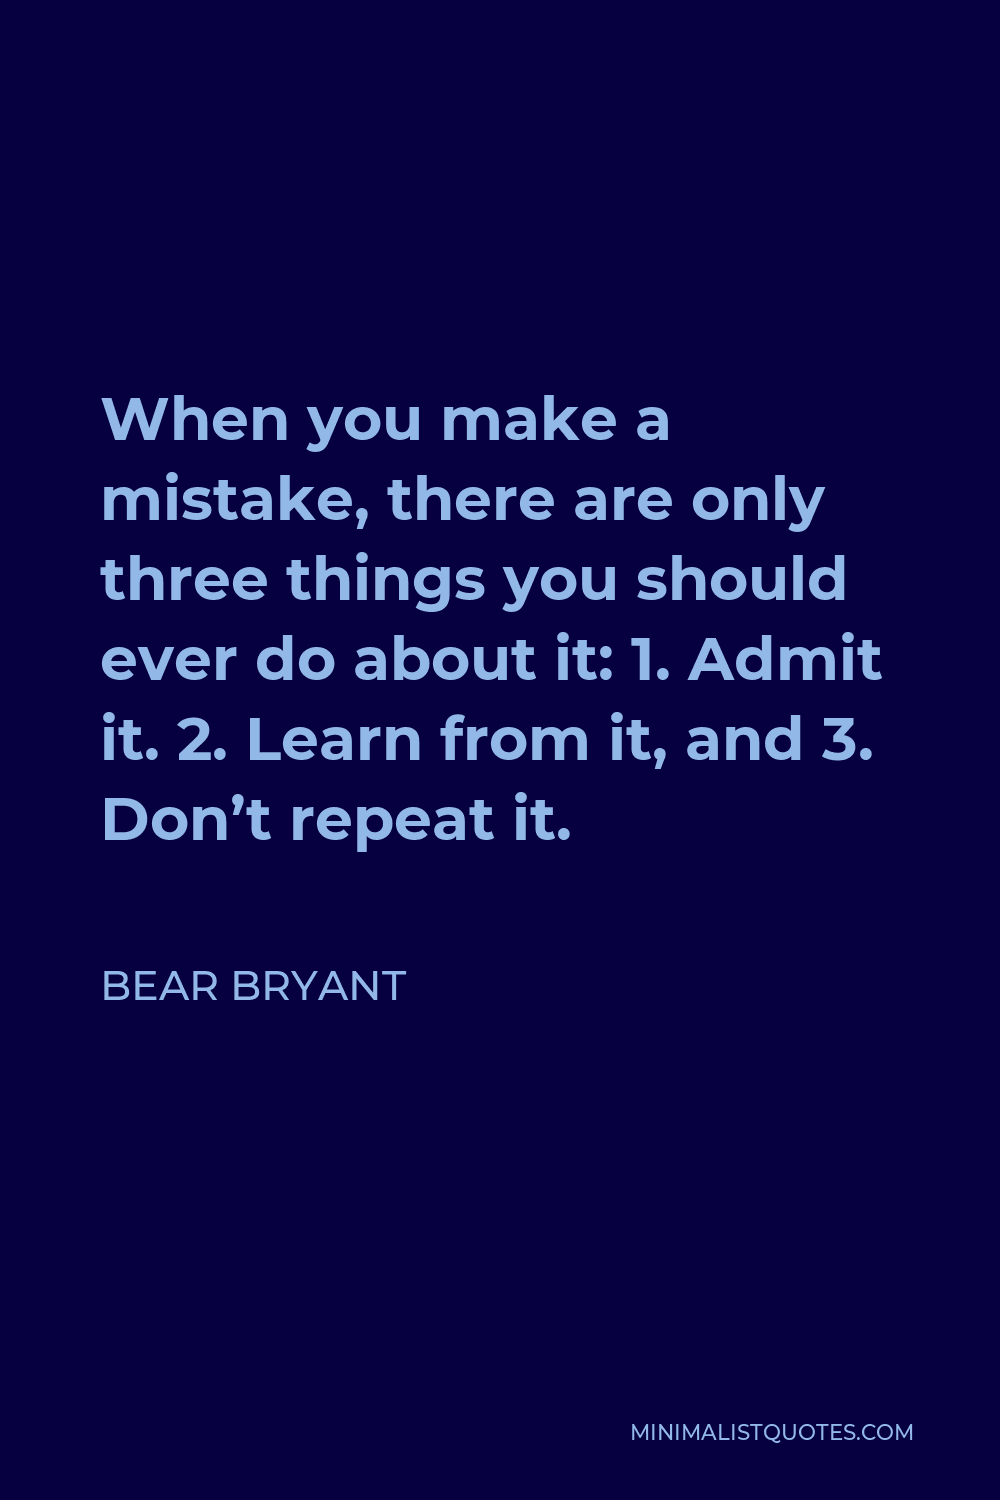 Bear Bryant Quote - When you make a mistake, there are only three things you should ever do about it: 1. Admit it. 2. Learn from it, and 3. Don’t repeat it.